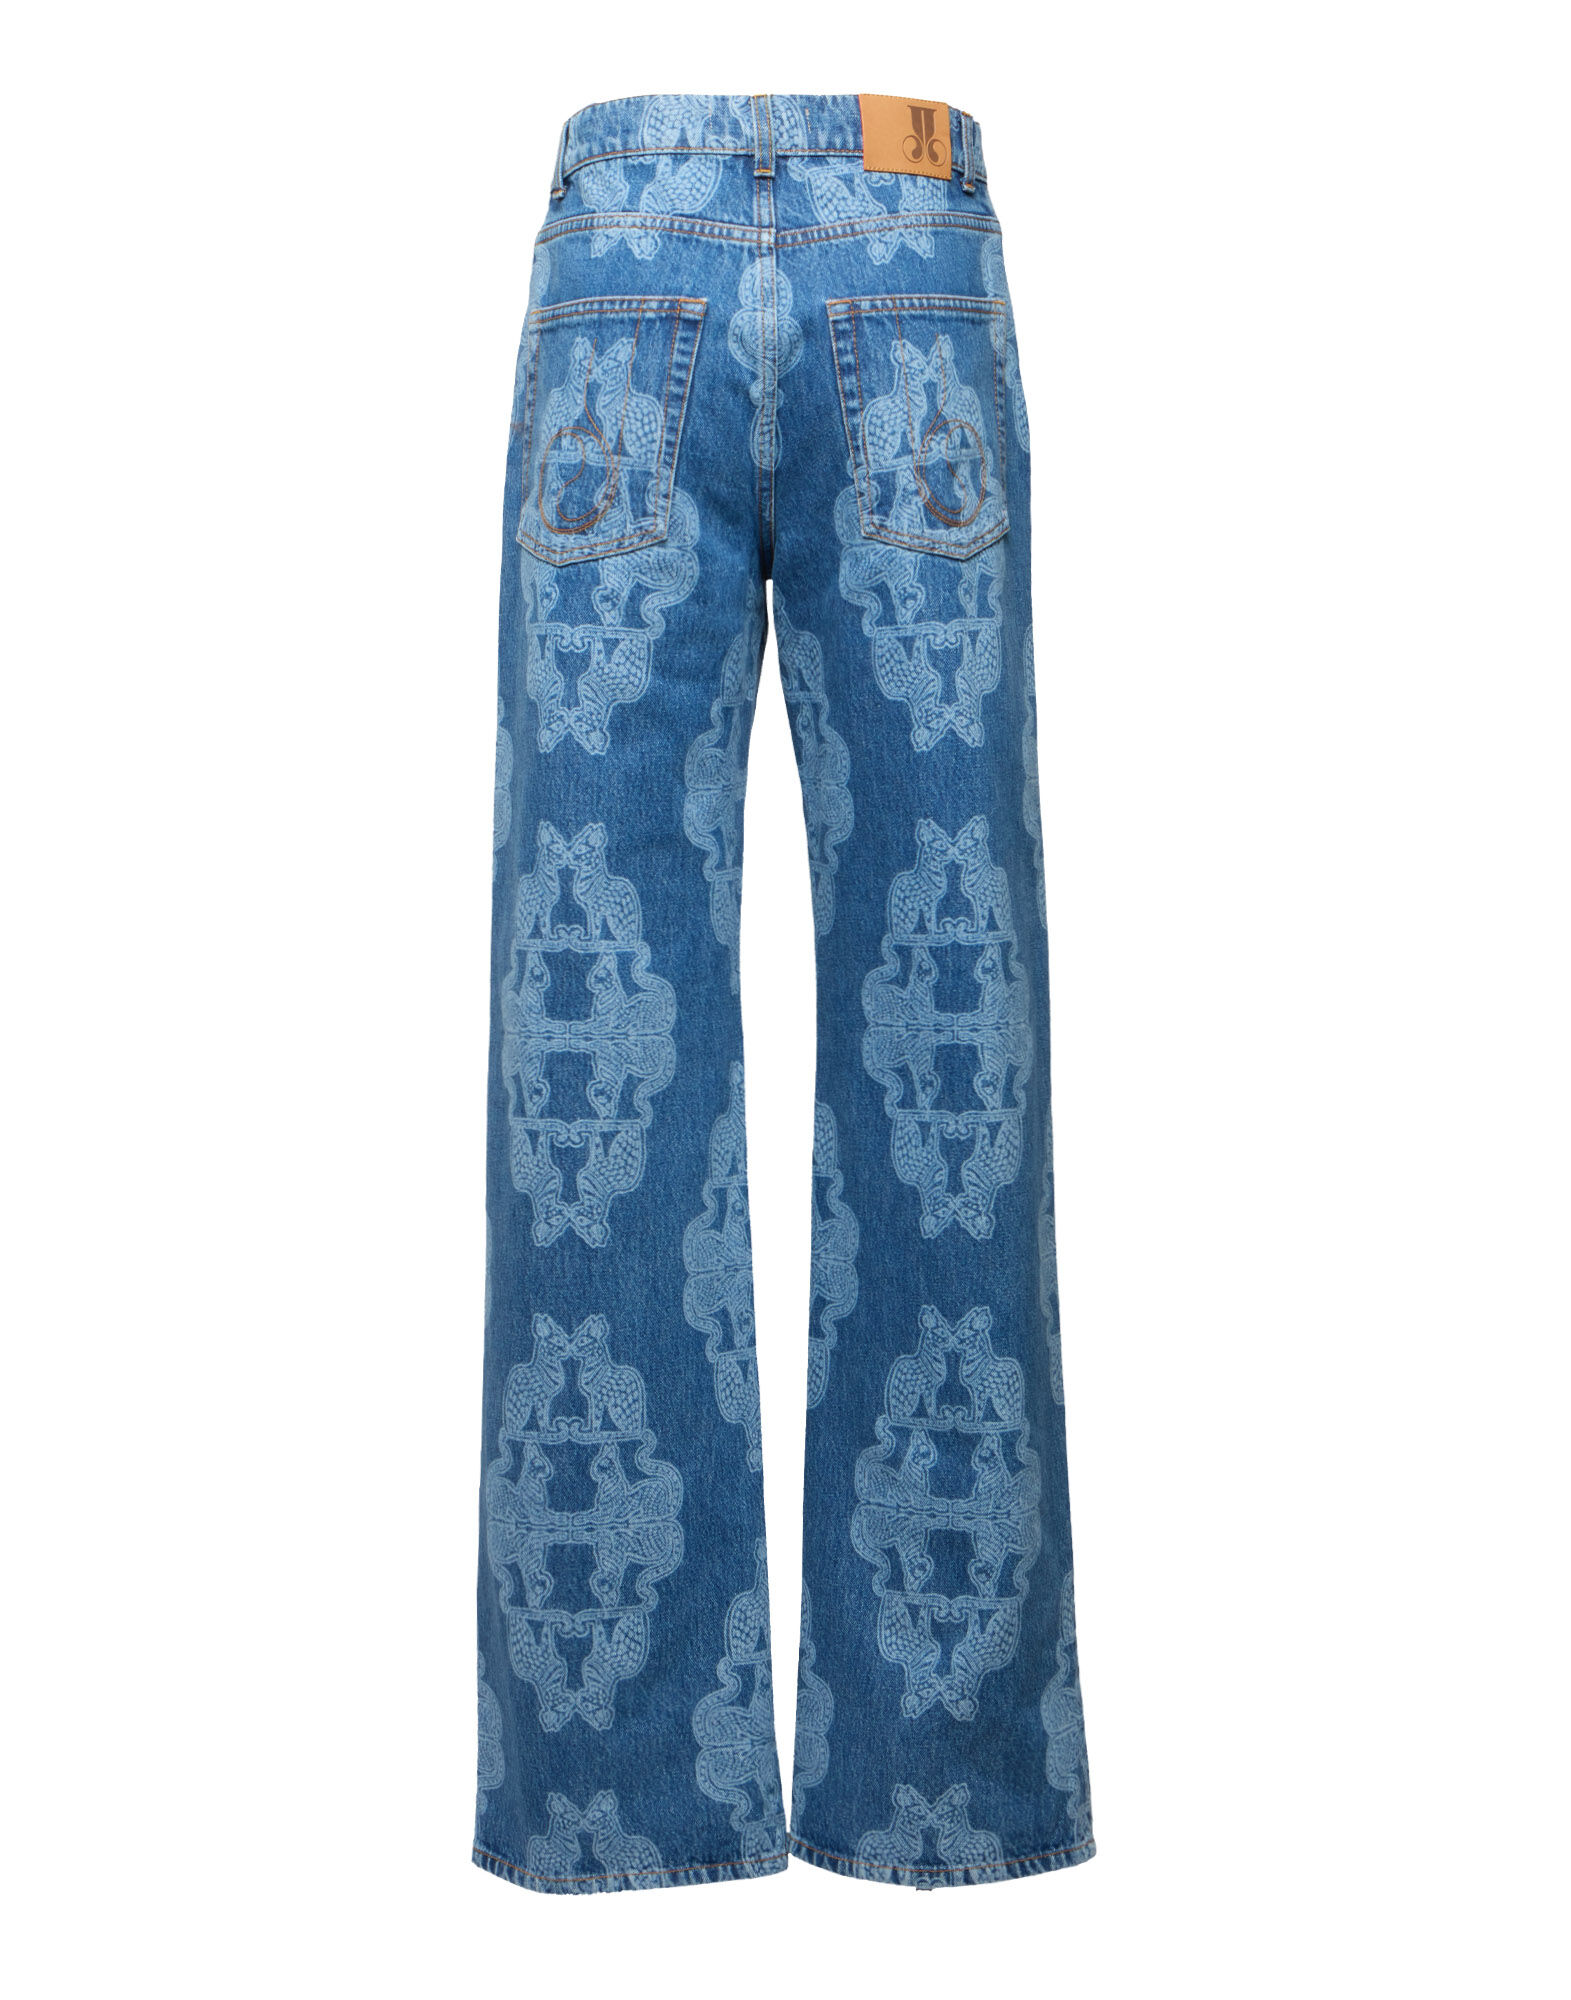 Buy ZALIO DDisney Featuring Minnie Mouse & Daisy Duck Printed Straight Fit  Heavy Fade Denim Jeans Blue for Girls (3-4Years) Online in India, Shop at  FirstCry.com - 14613264